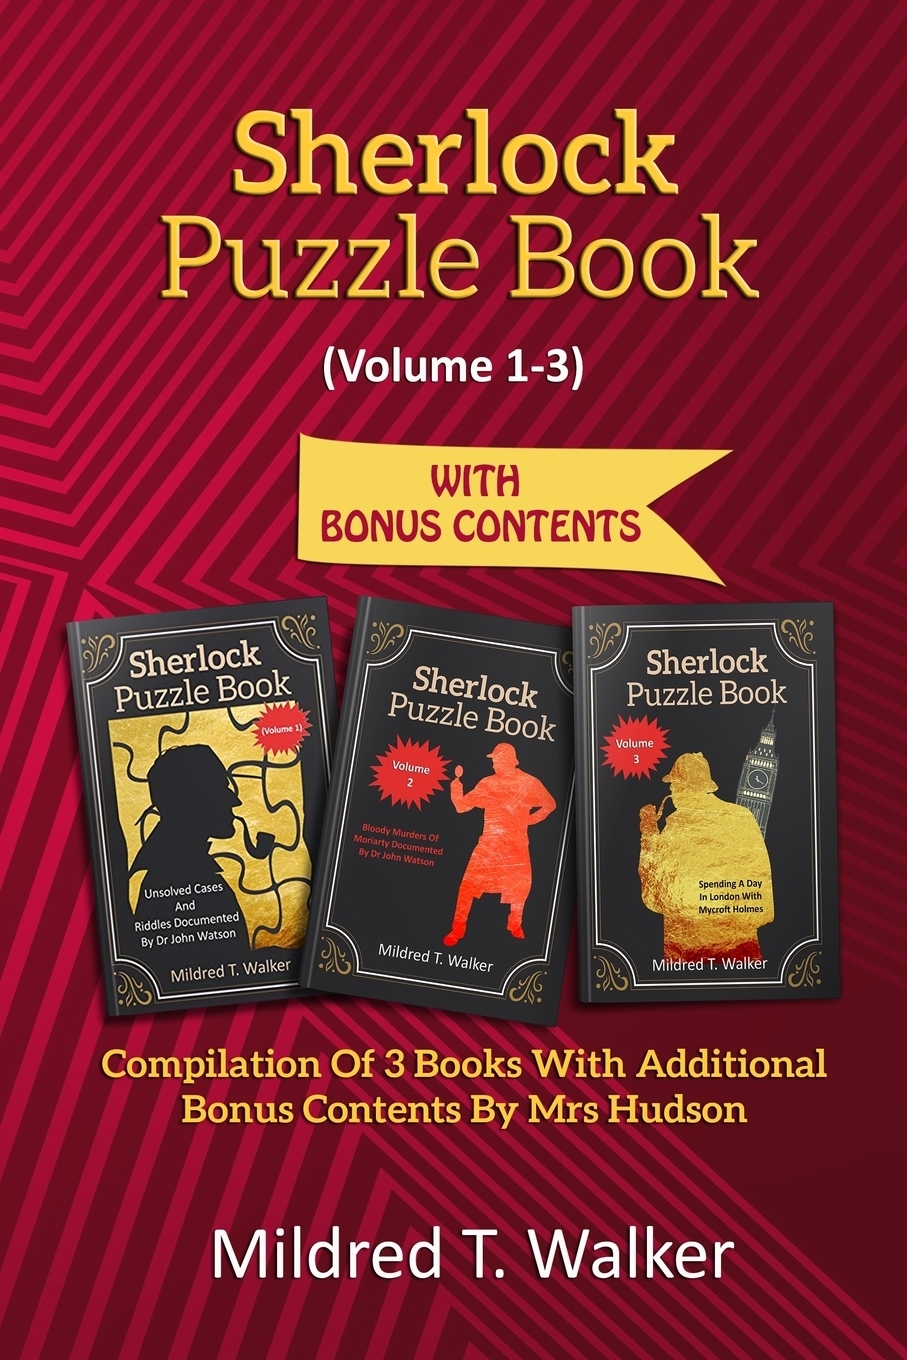 фото Sherlock Puzzle Book (Volume 1-3). Compilation Of 3 Books With Additional Bonus Contents By Mrs Hudson